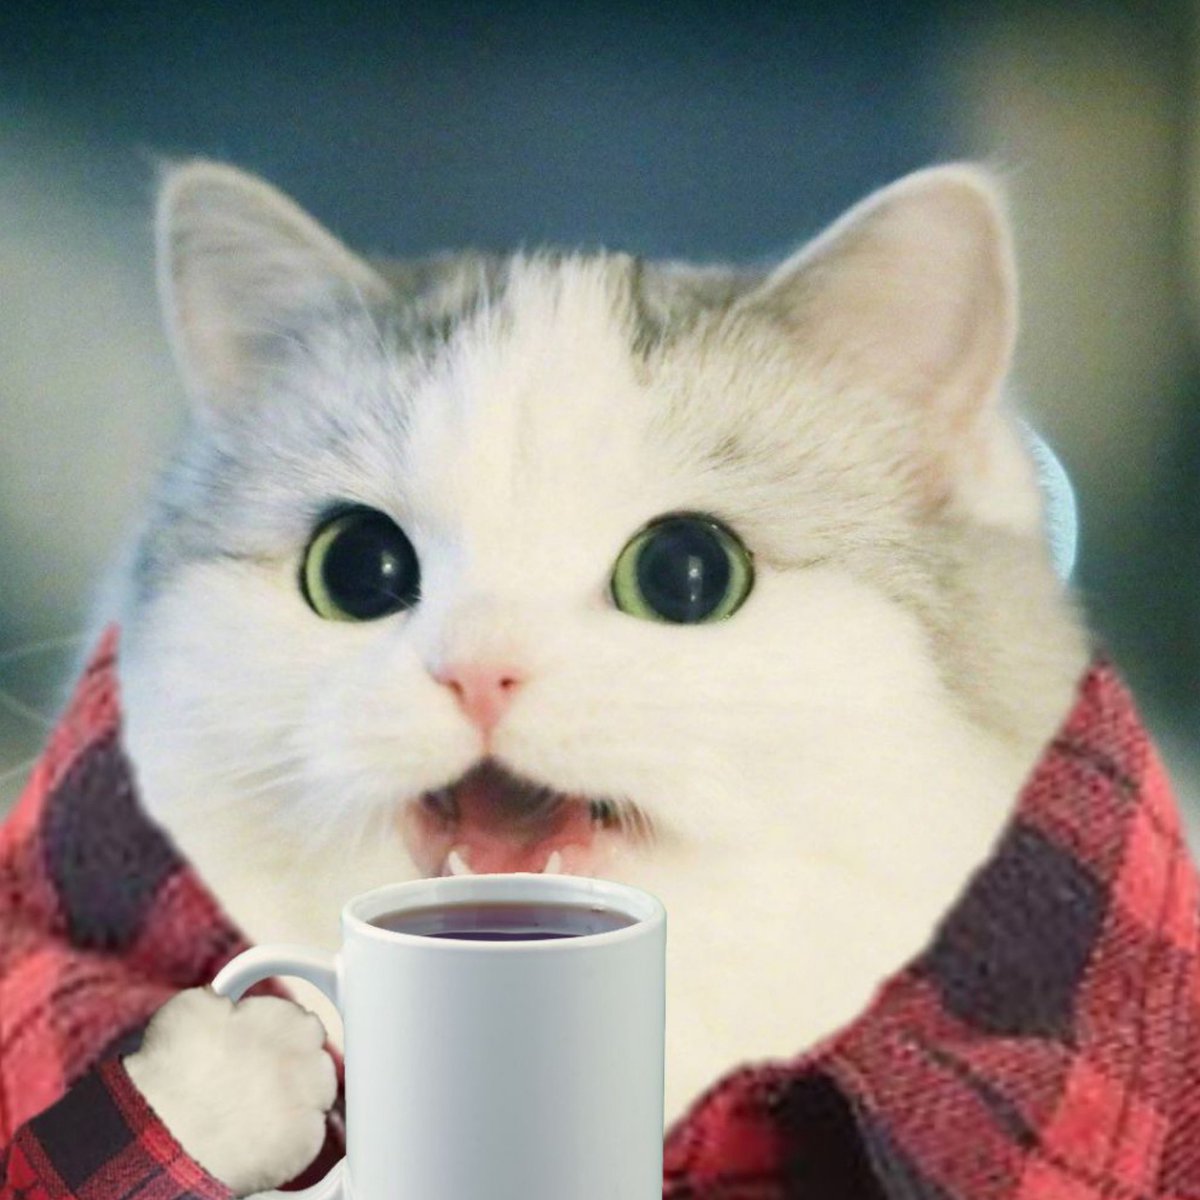 You are currently viewing Good Mornt

*sip